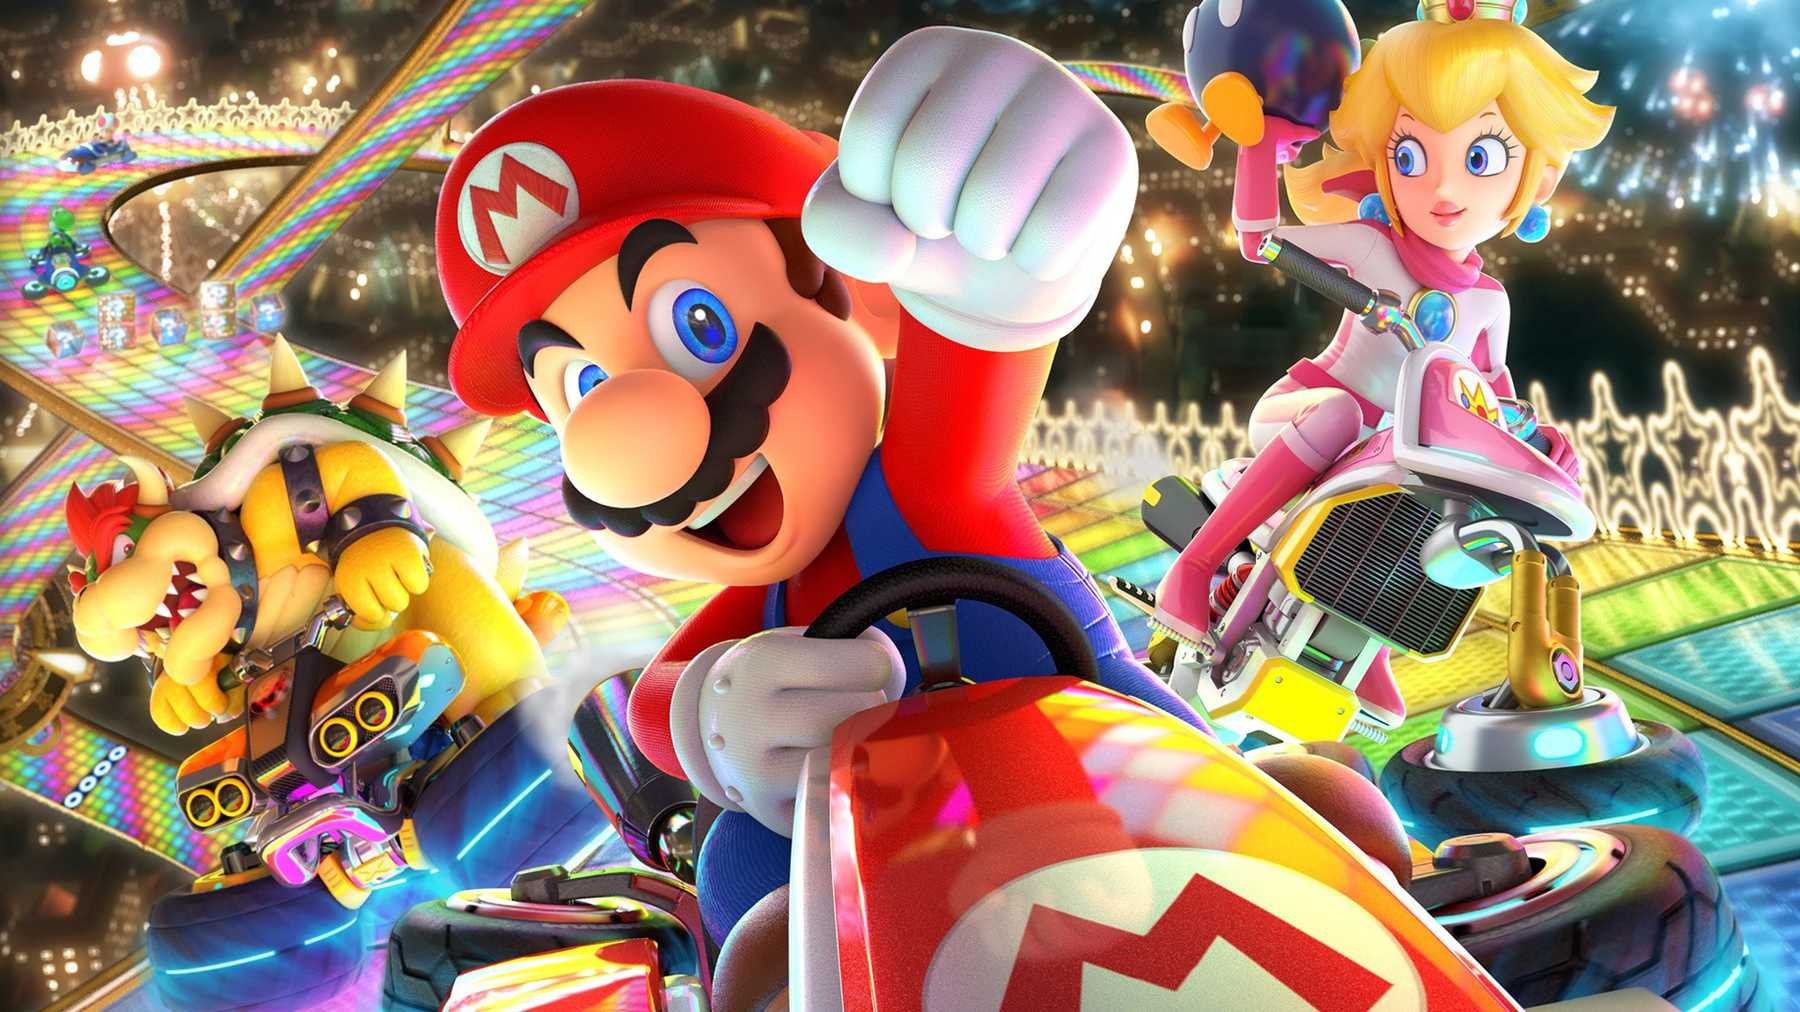 top selling switch games 2019